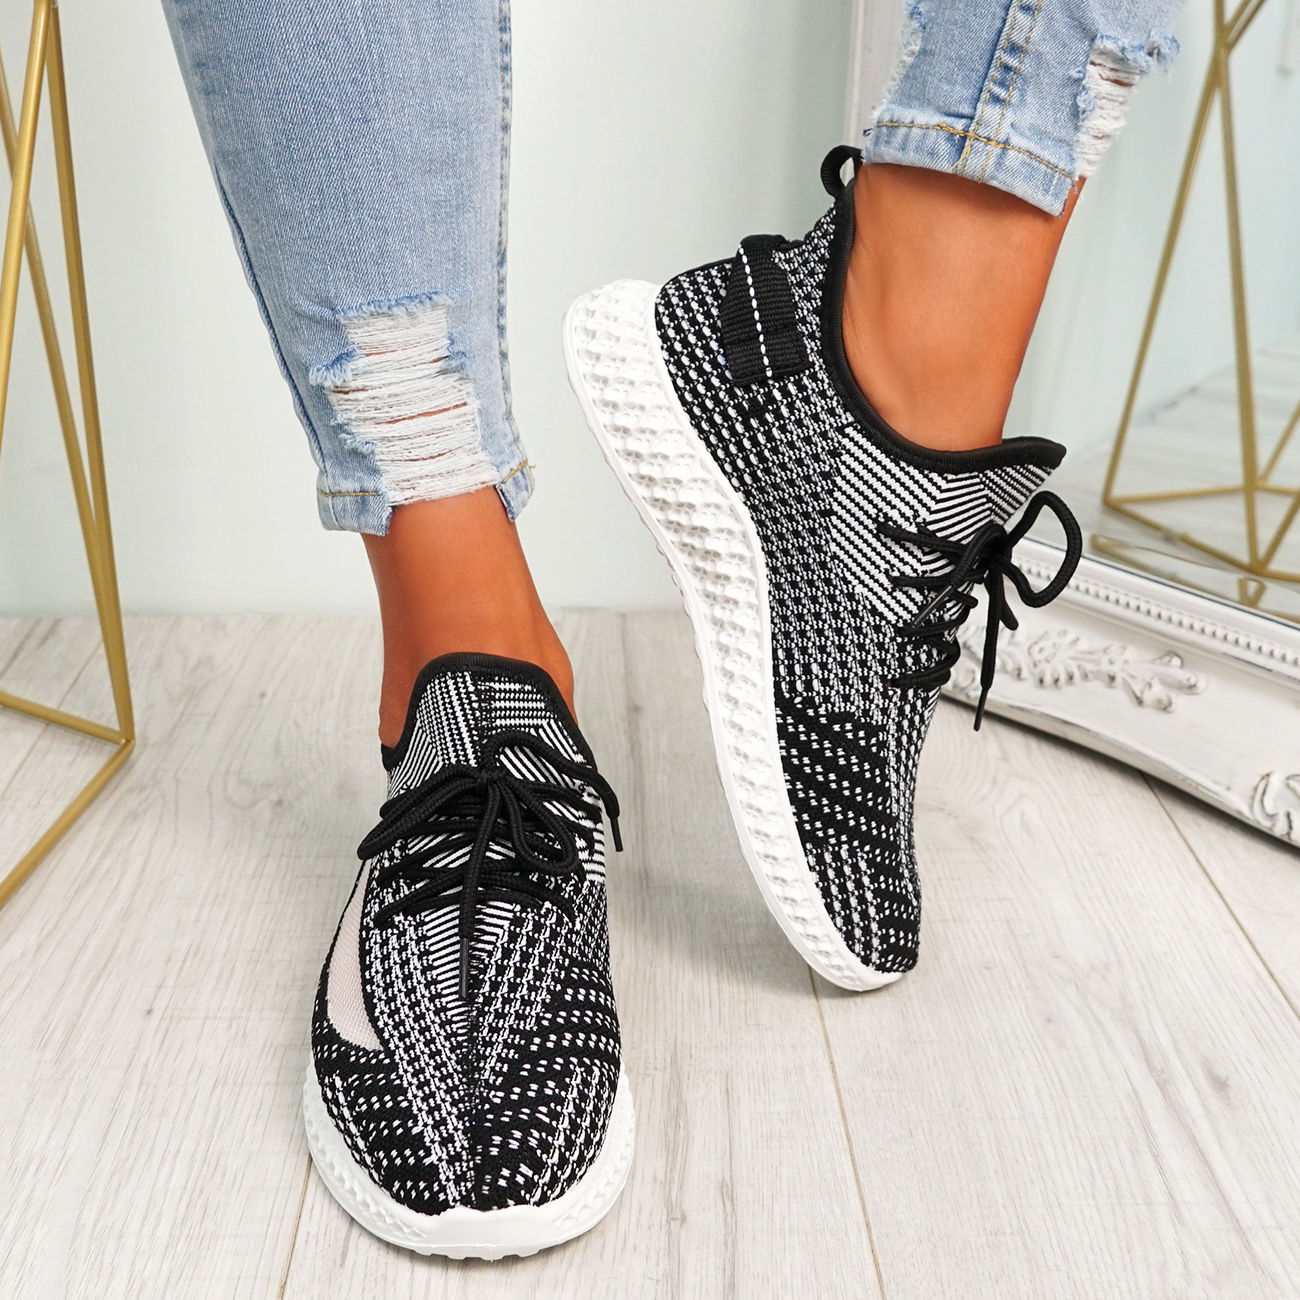 WOMENS LADIES KNIT TRAINERS SLIP ON SPORT SNEAKERS CASUAL RUNNING